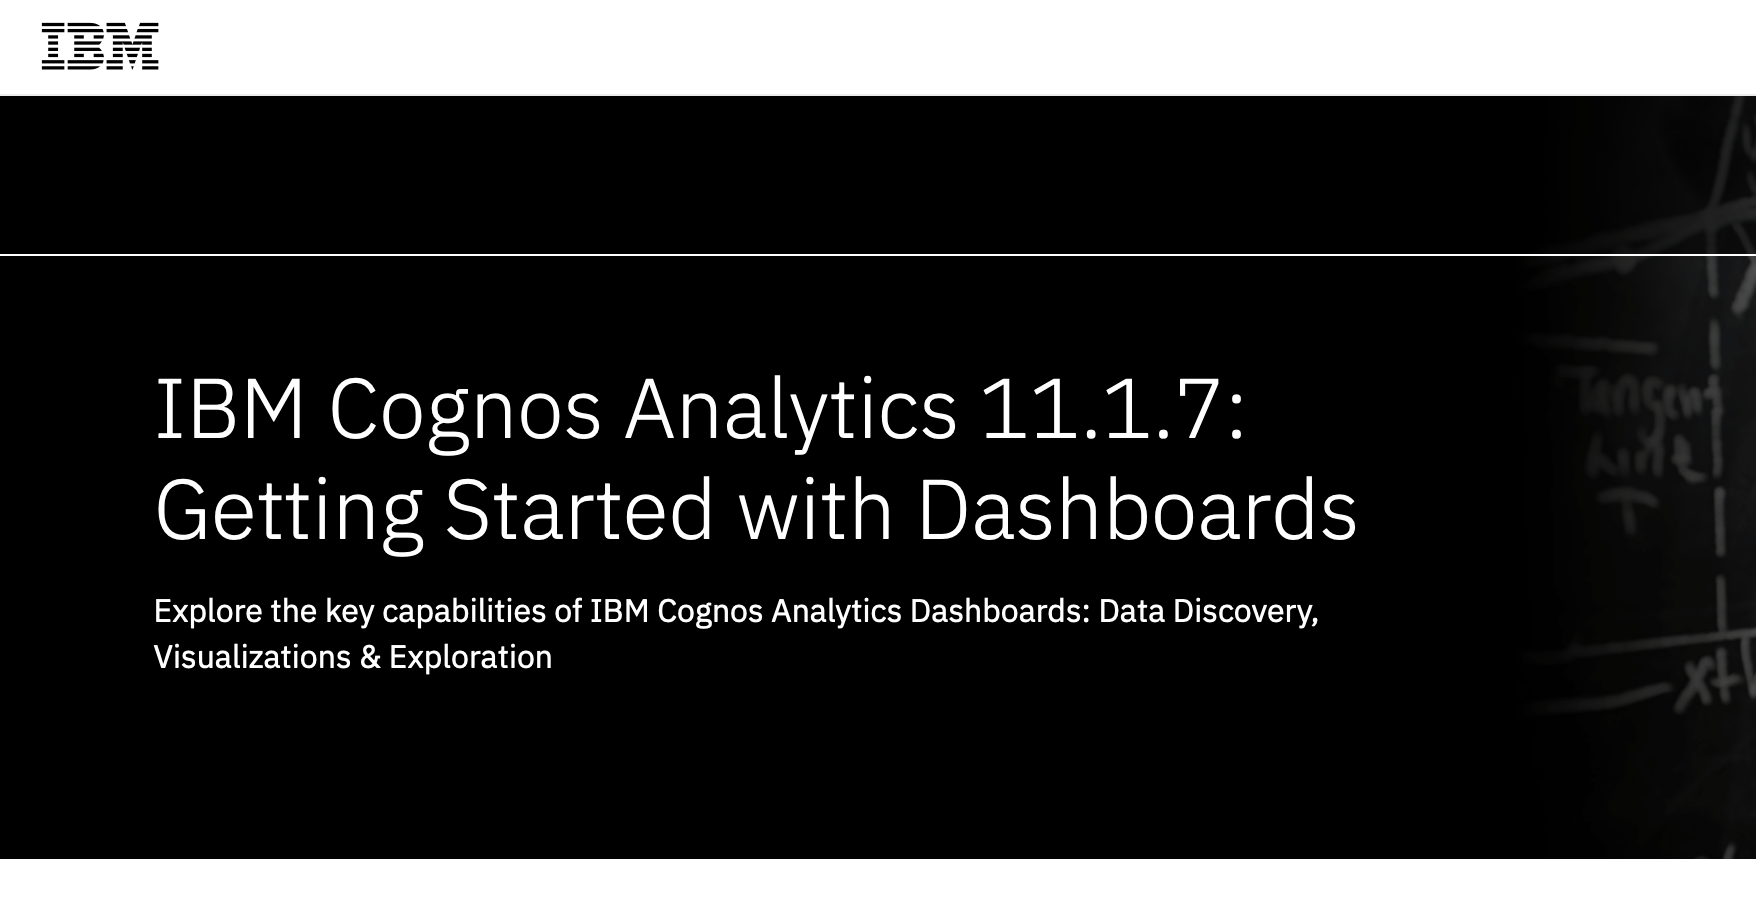 Getting Started with Dashboards workshop for Cognos Analytics 11.1.7  - Getting Started with Dashboards workshop for Cognos Analytics 11.1.7